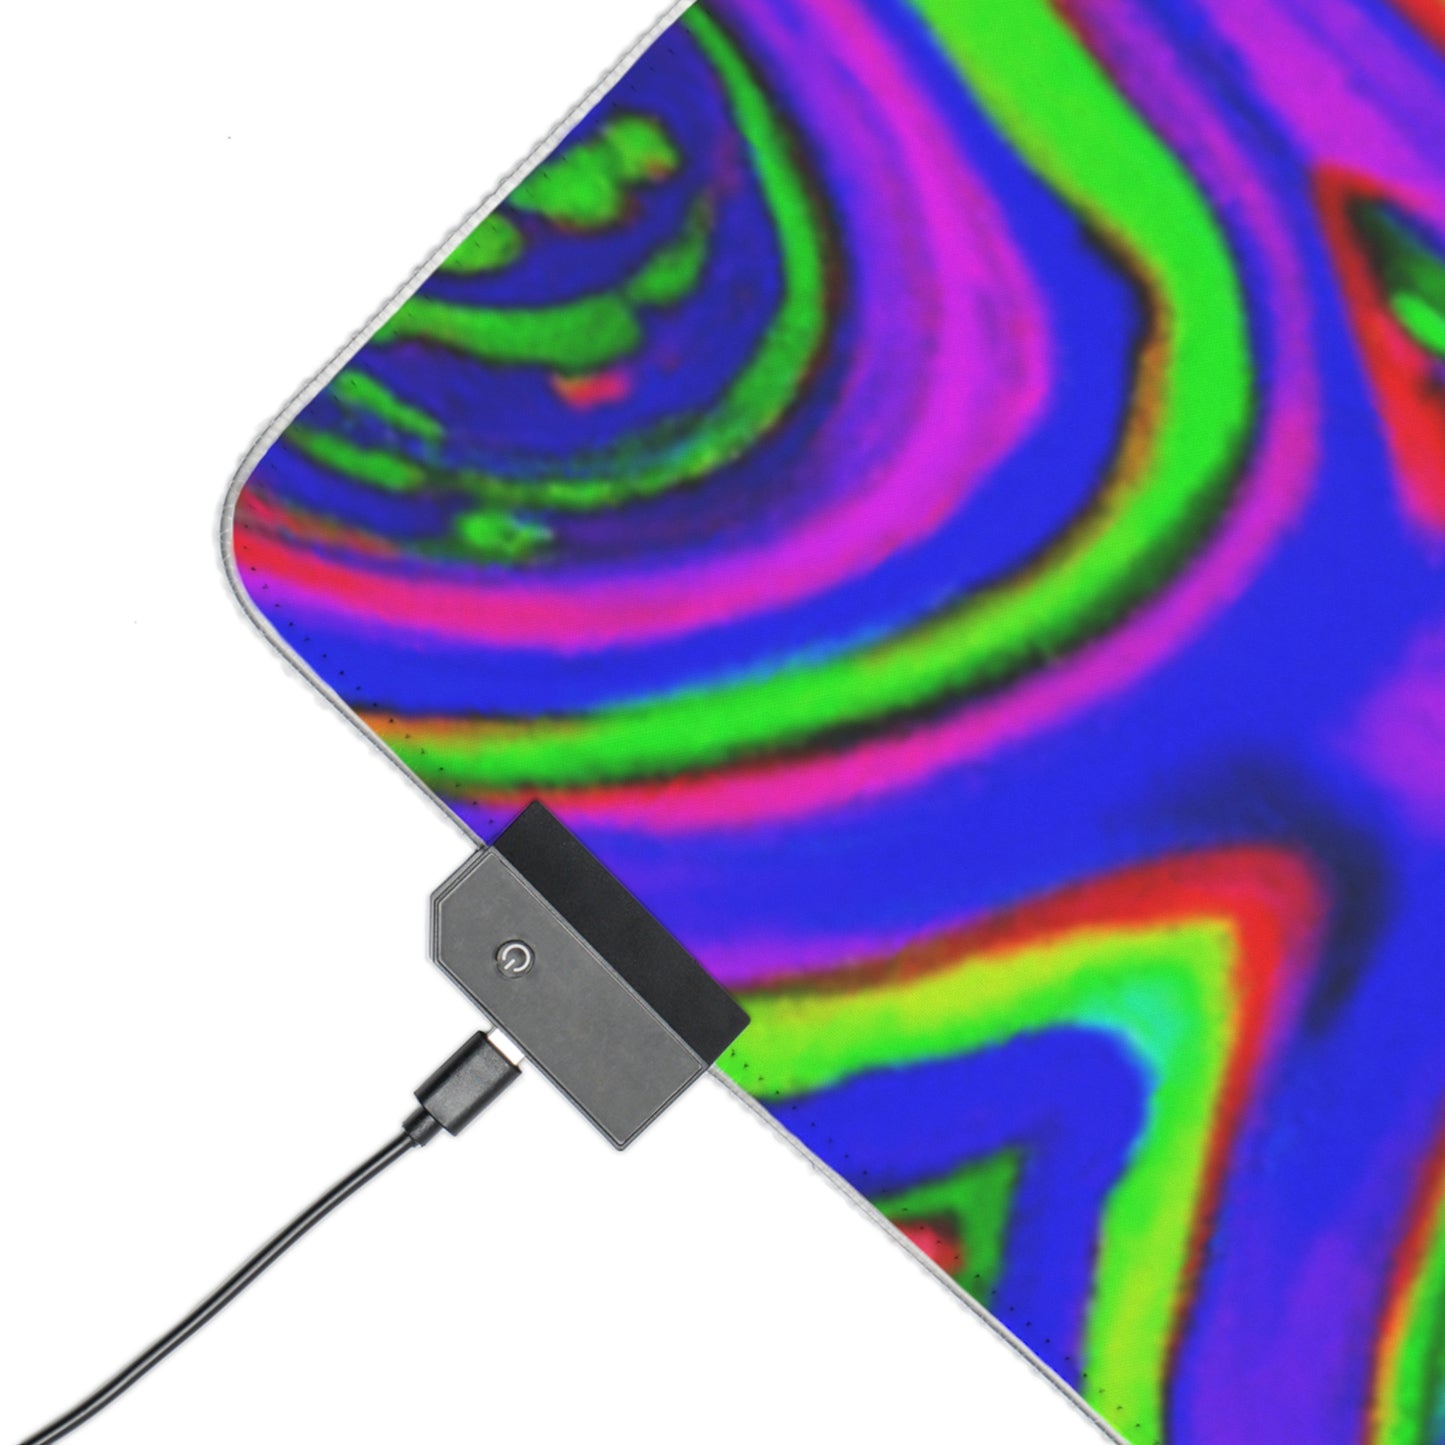 Fritz the Freewheeler - Psychedelic Trippy LED Light Up Gaming Mouse Pad